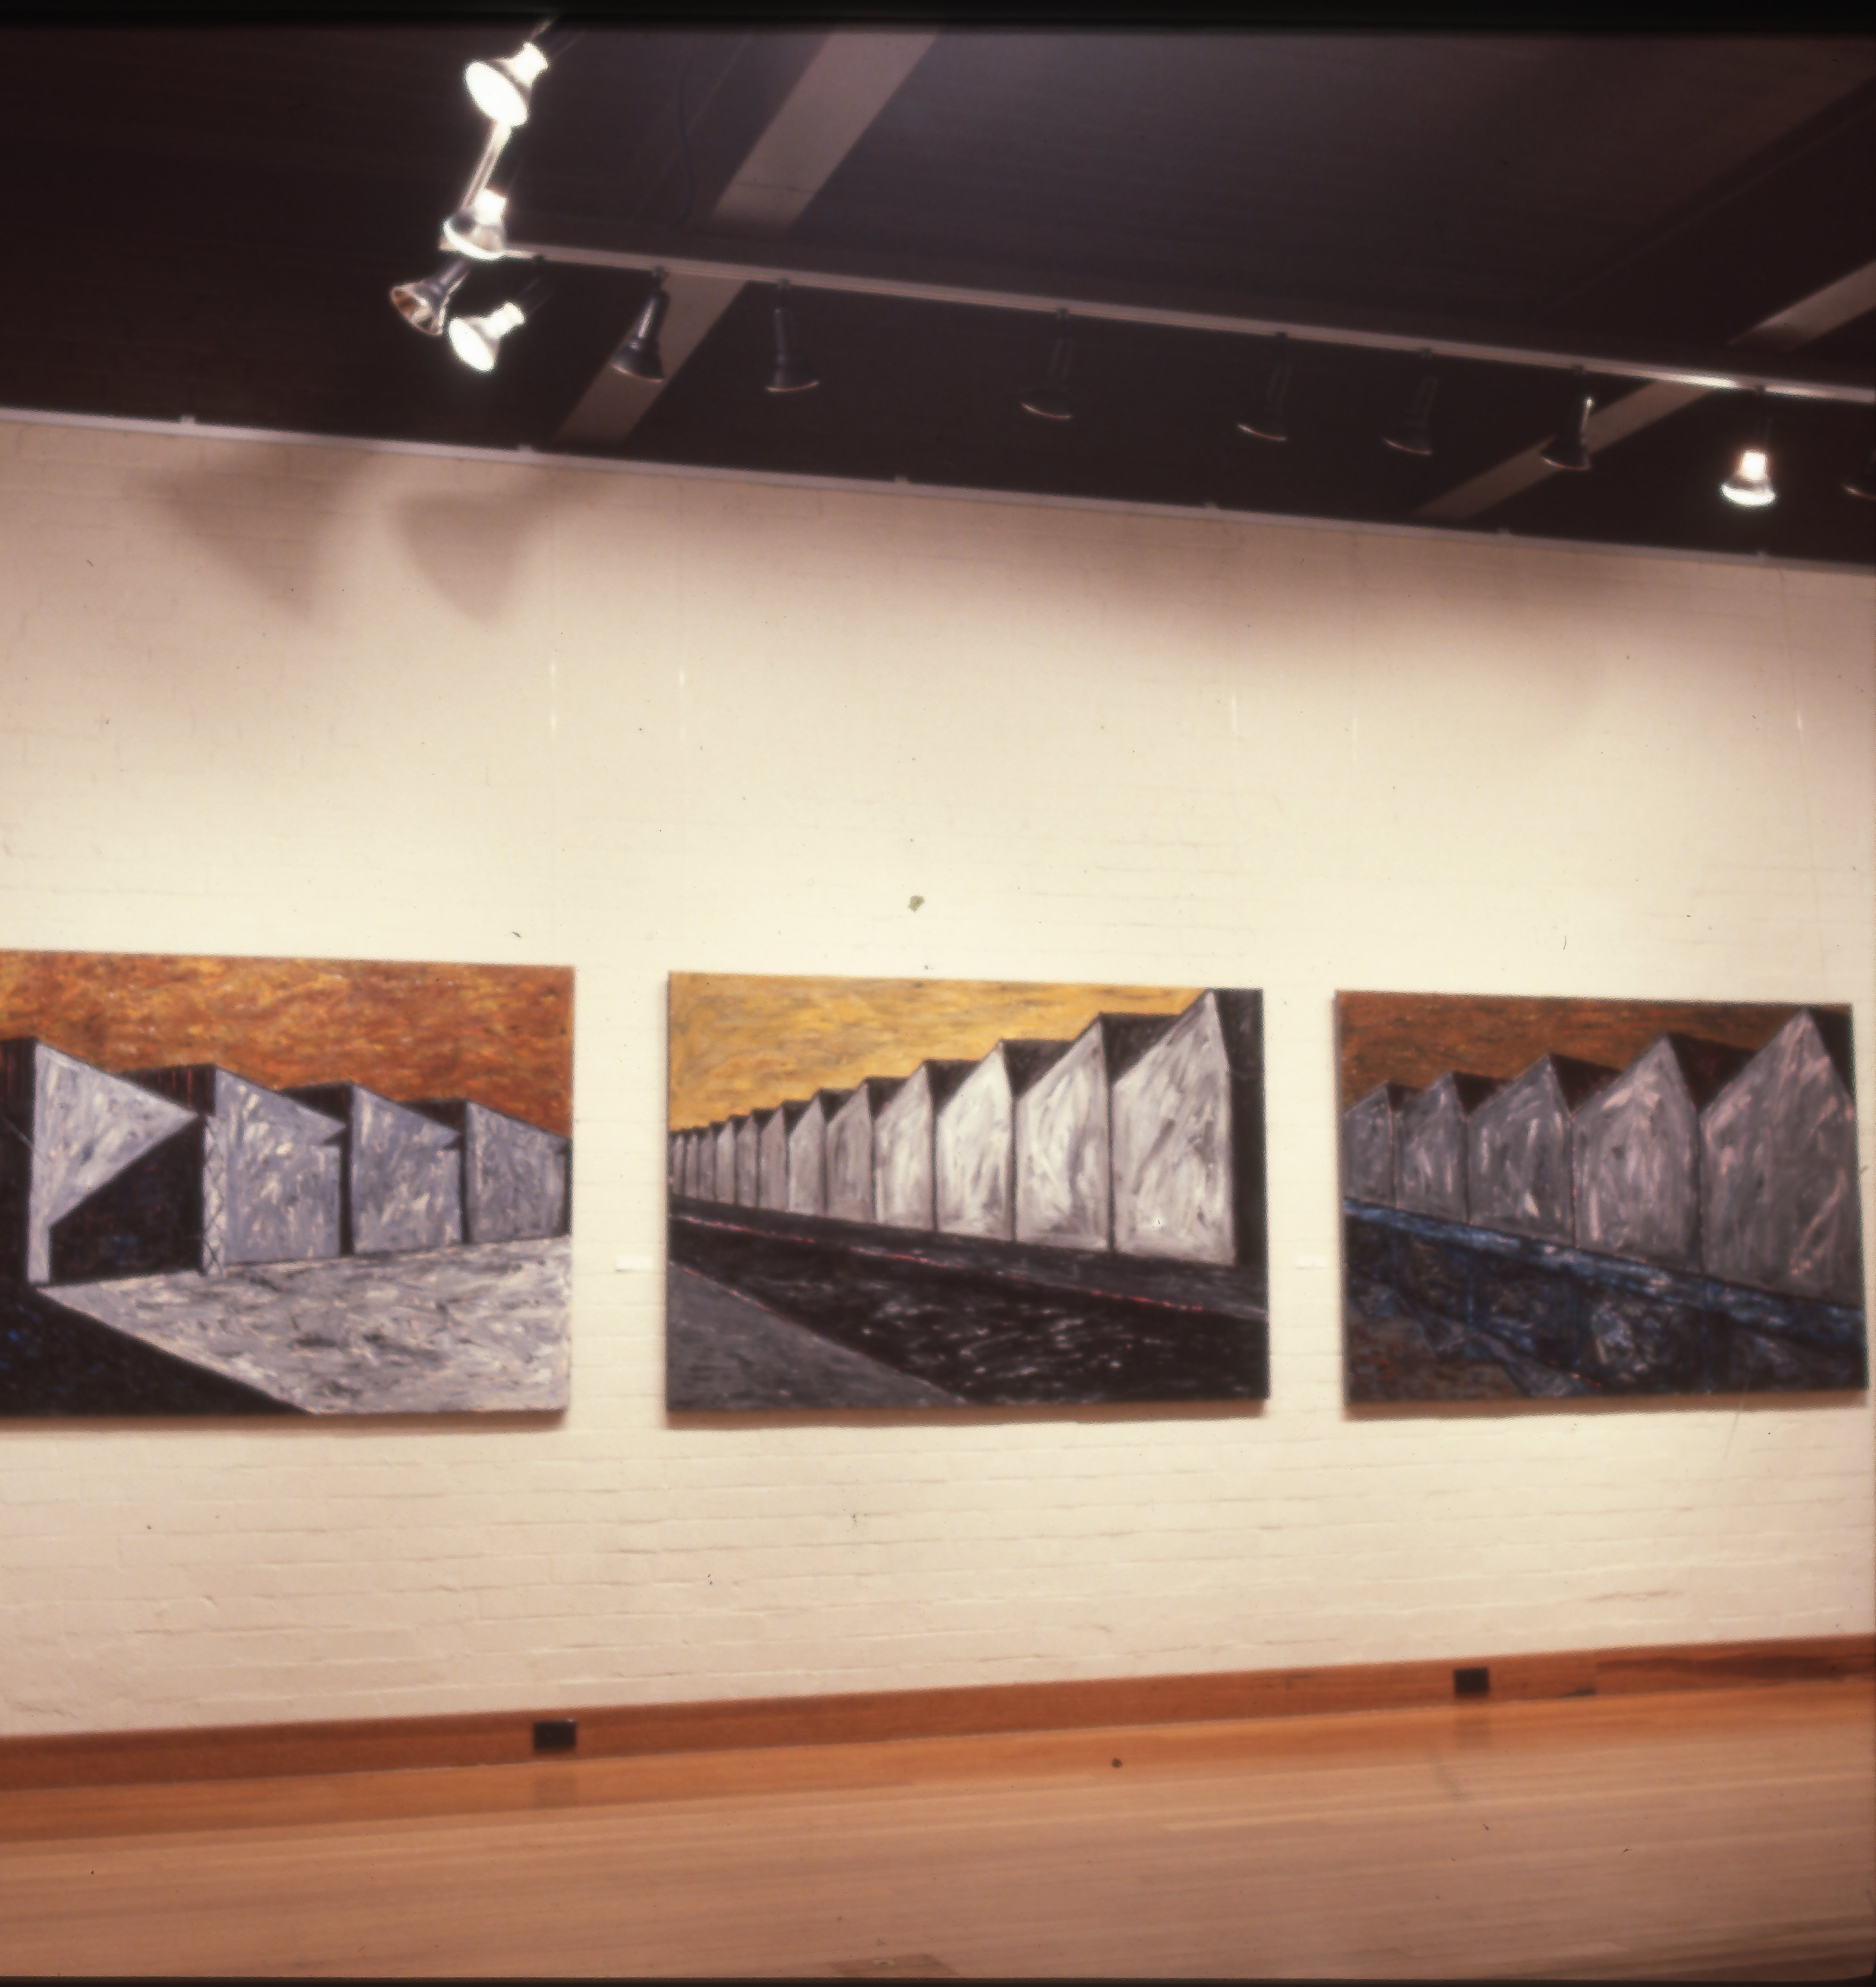 idg_archive_1982_urban_images_002_install.jpg